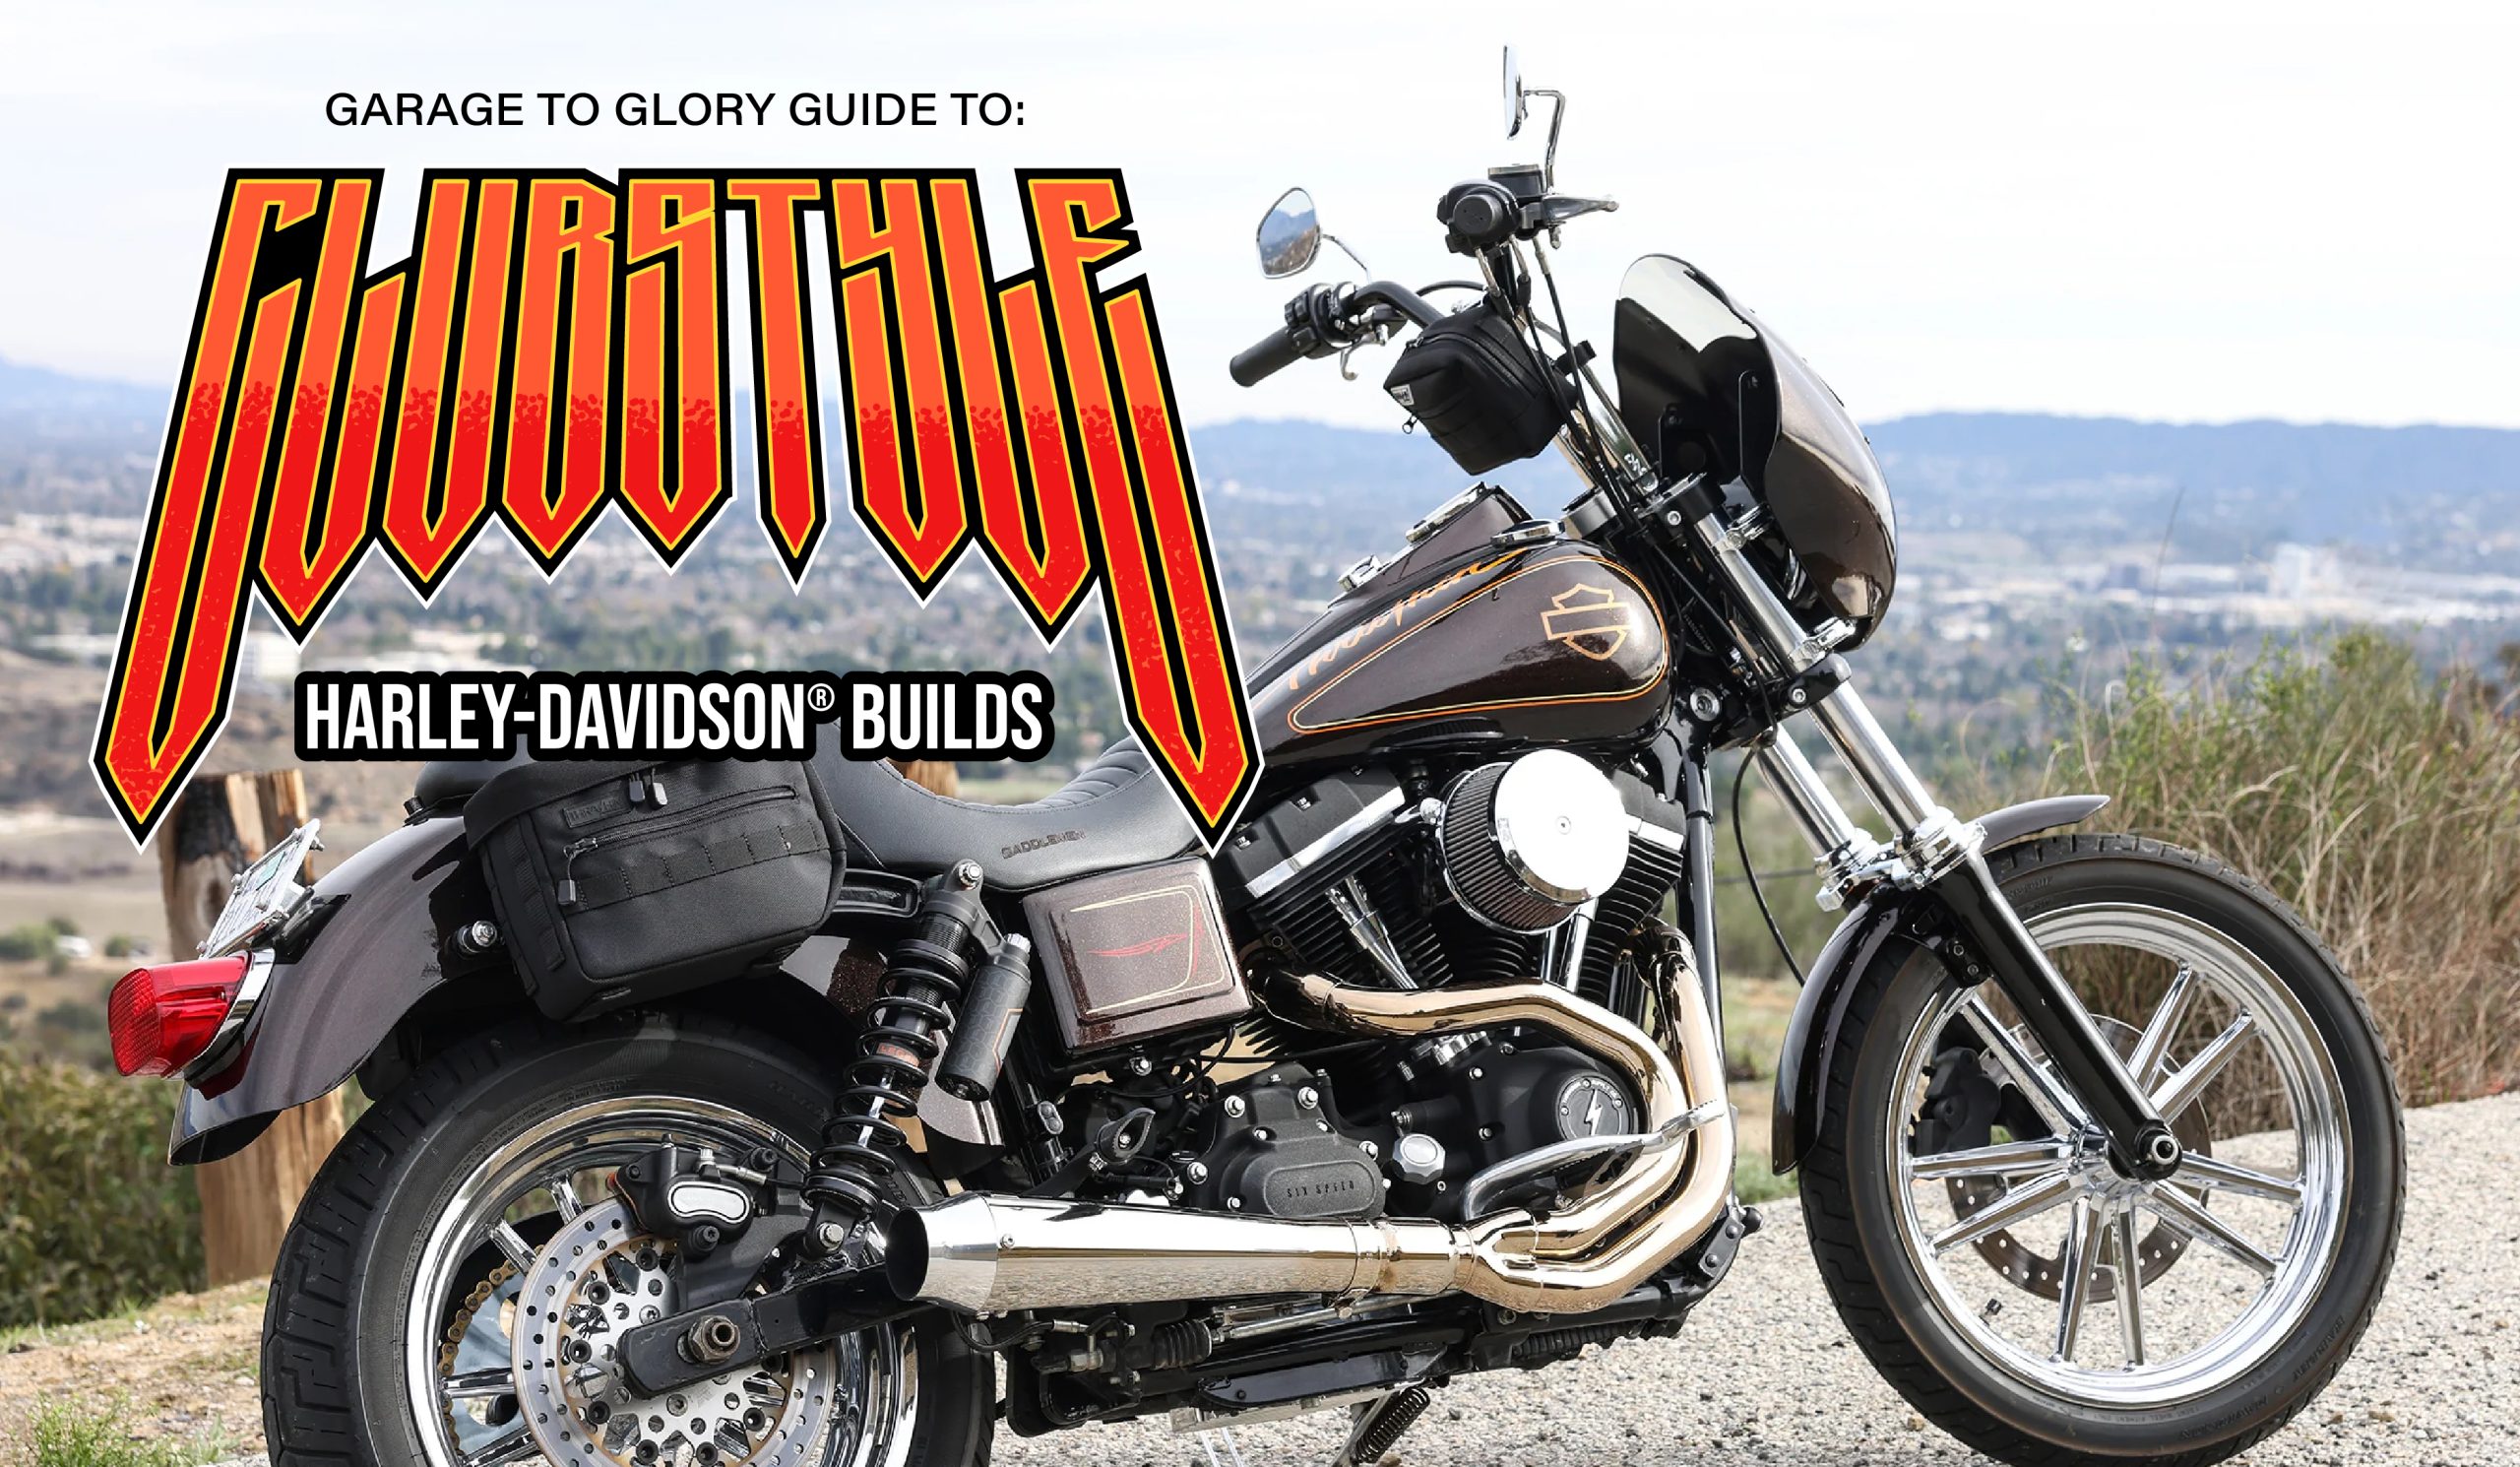 Club Style Harley-Davidson® Builds – From Garage To Glory